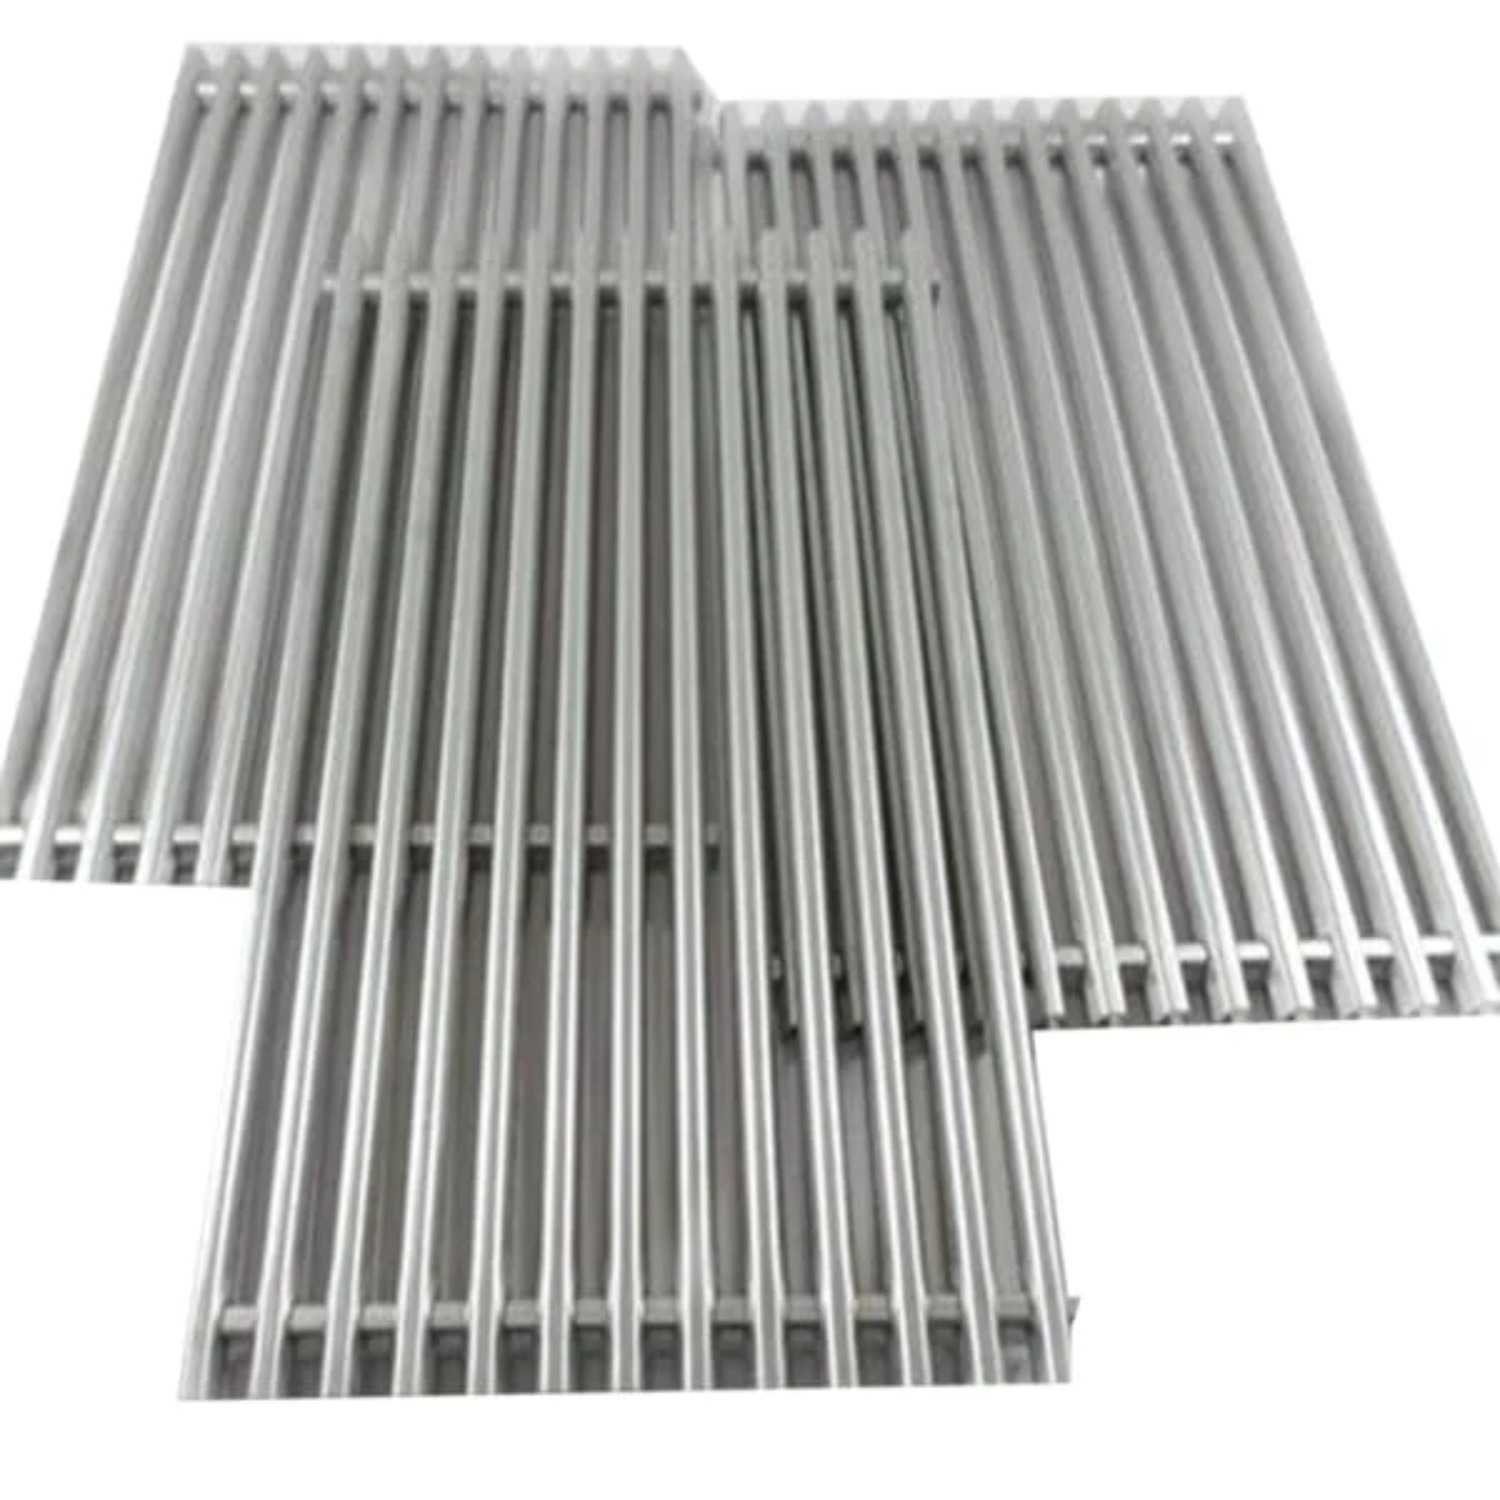 BBQ Grill Compatible With Weber Grills 3 Piece SS Grates 17-1/4 x 35-1/4 BCP85312 - image 1 of 4